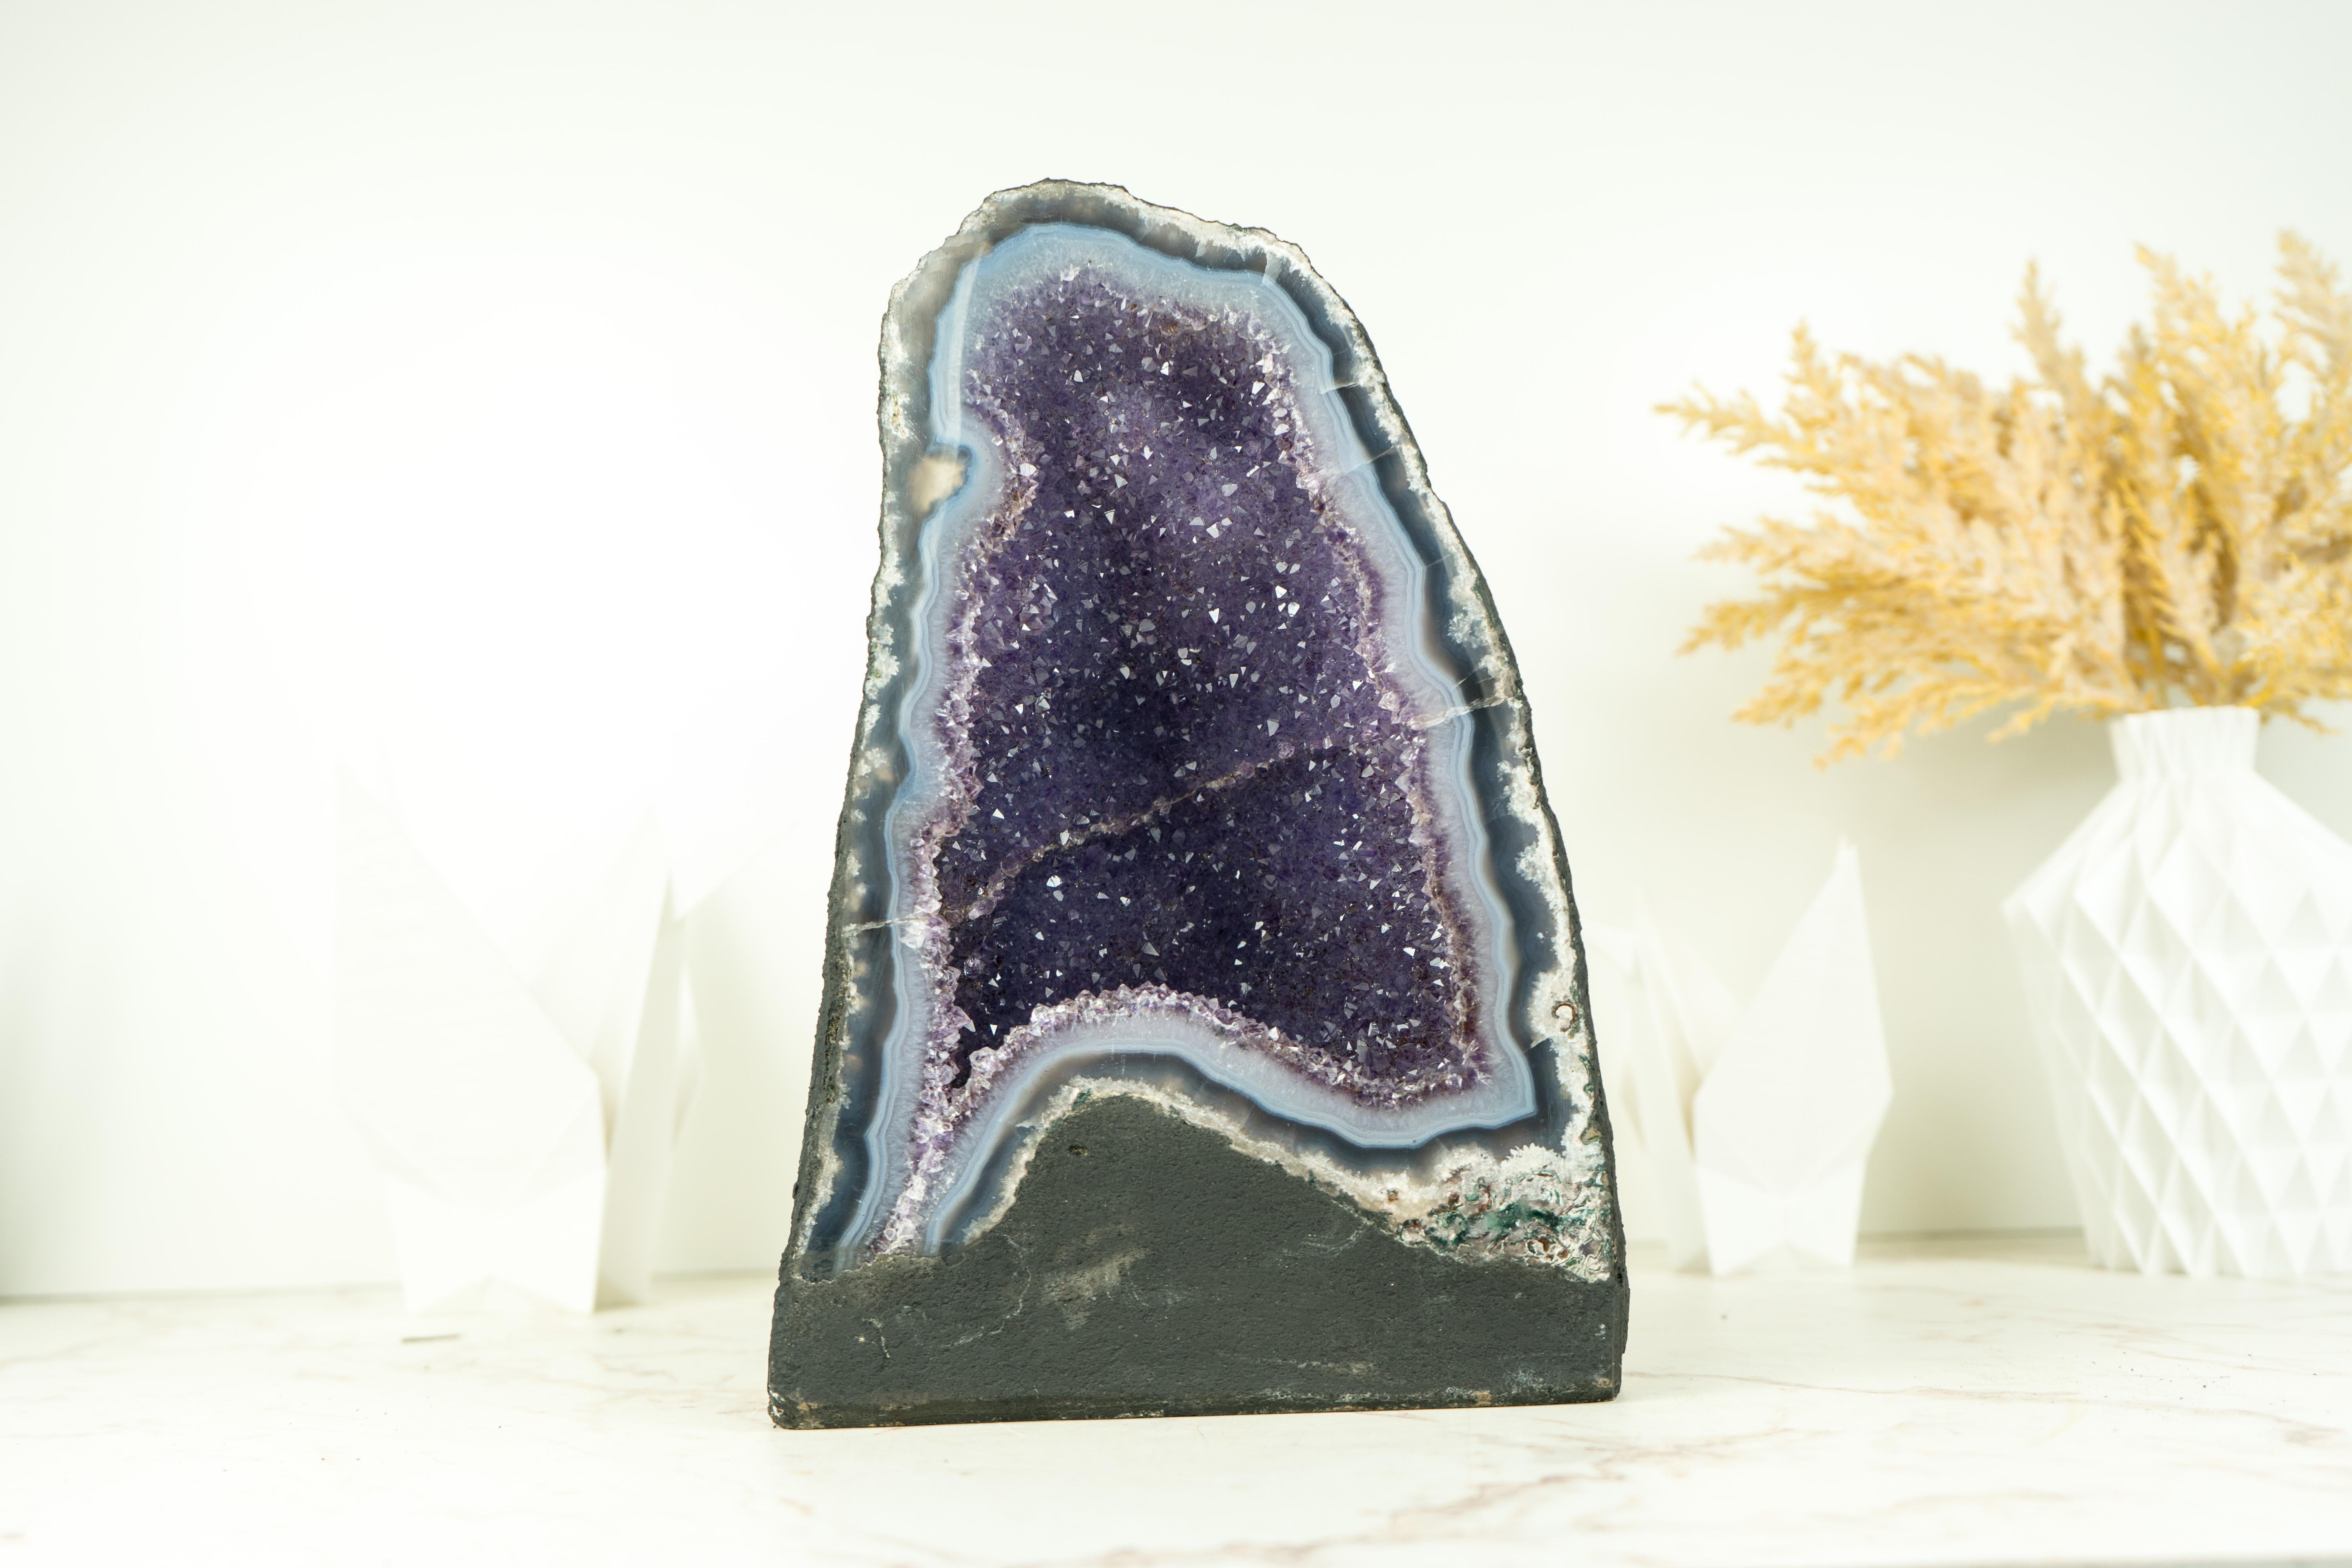 Small in size, this natural Agate Geode brings many rare characteristics that turn it into a natural artwork. Those characteristics, such as the blue agate band, the lavender galaxy druzy, and the perfection of its natural drawings will shine at